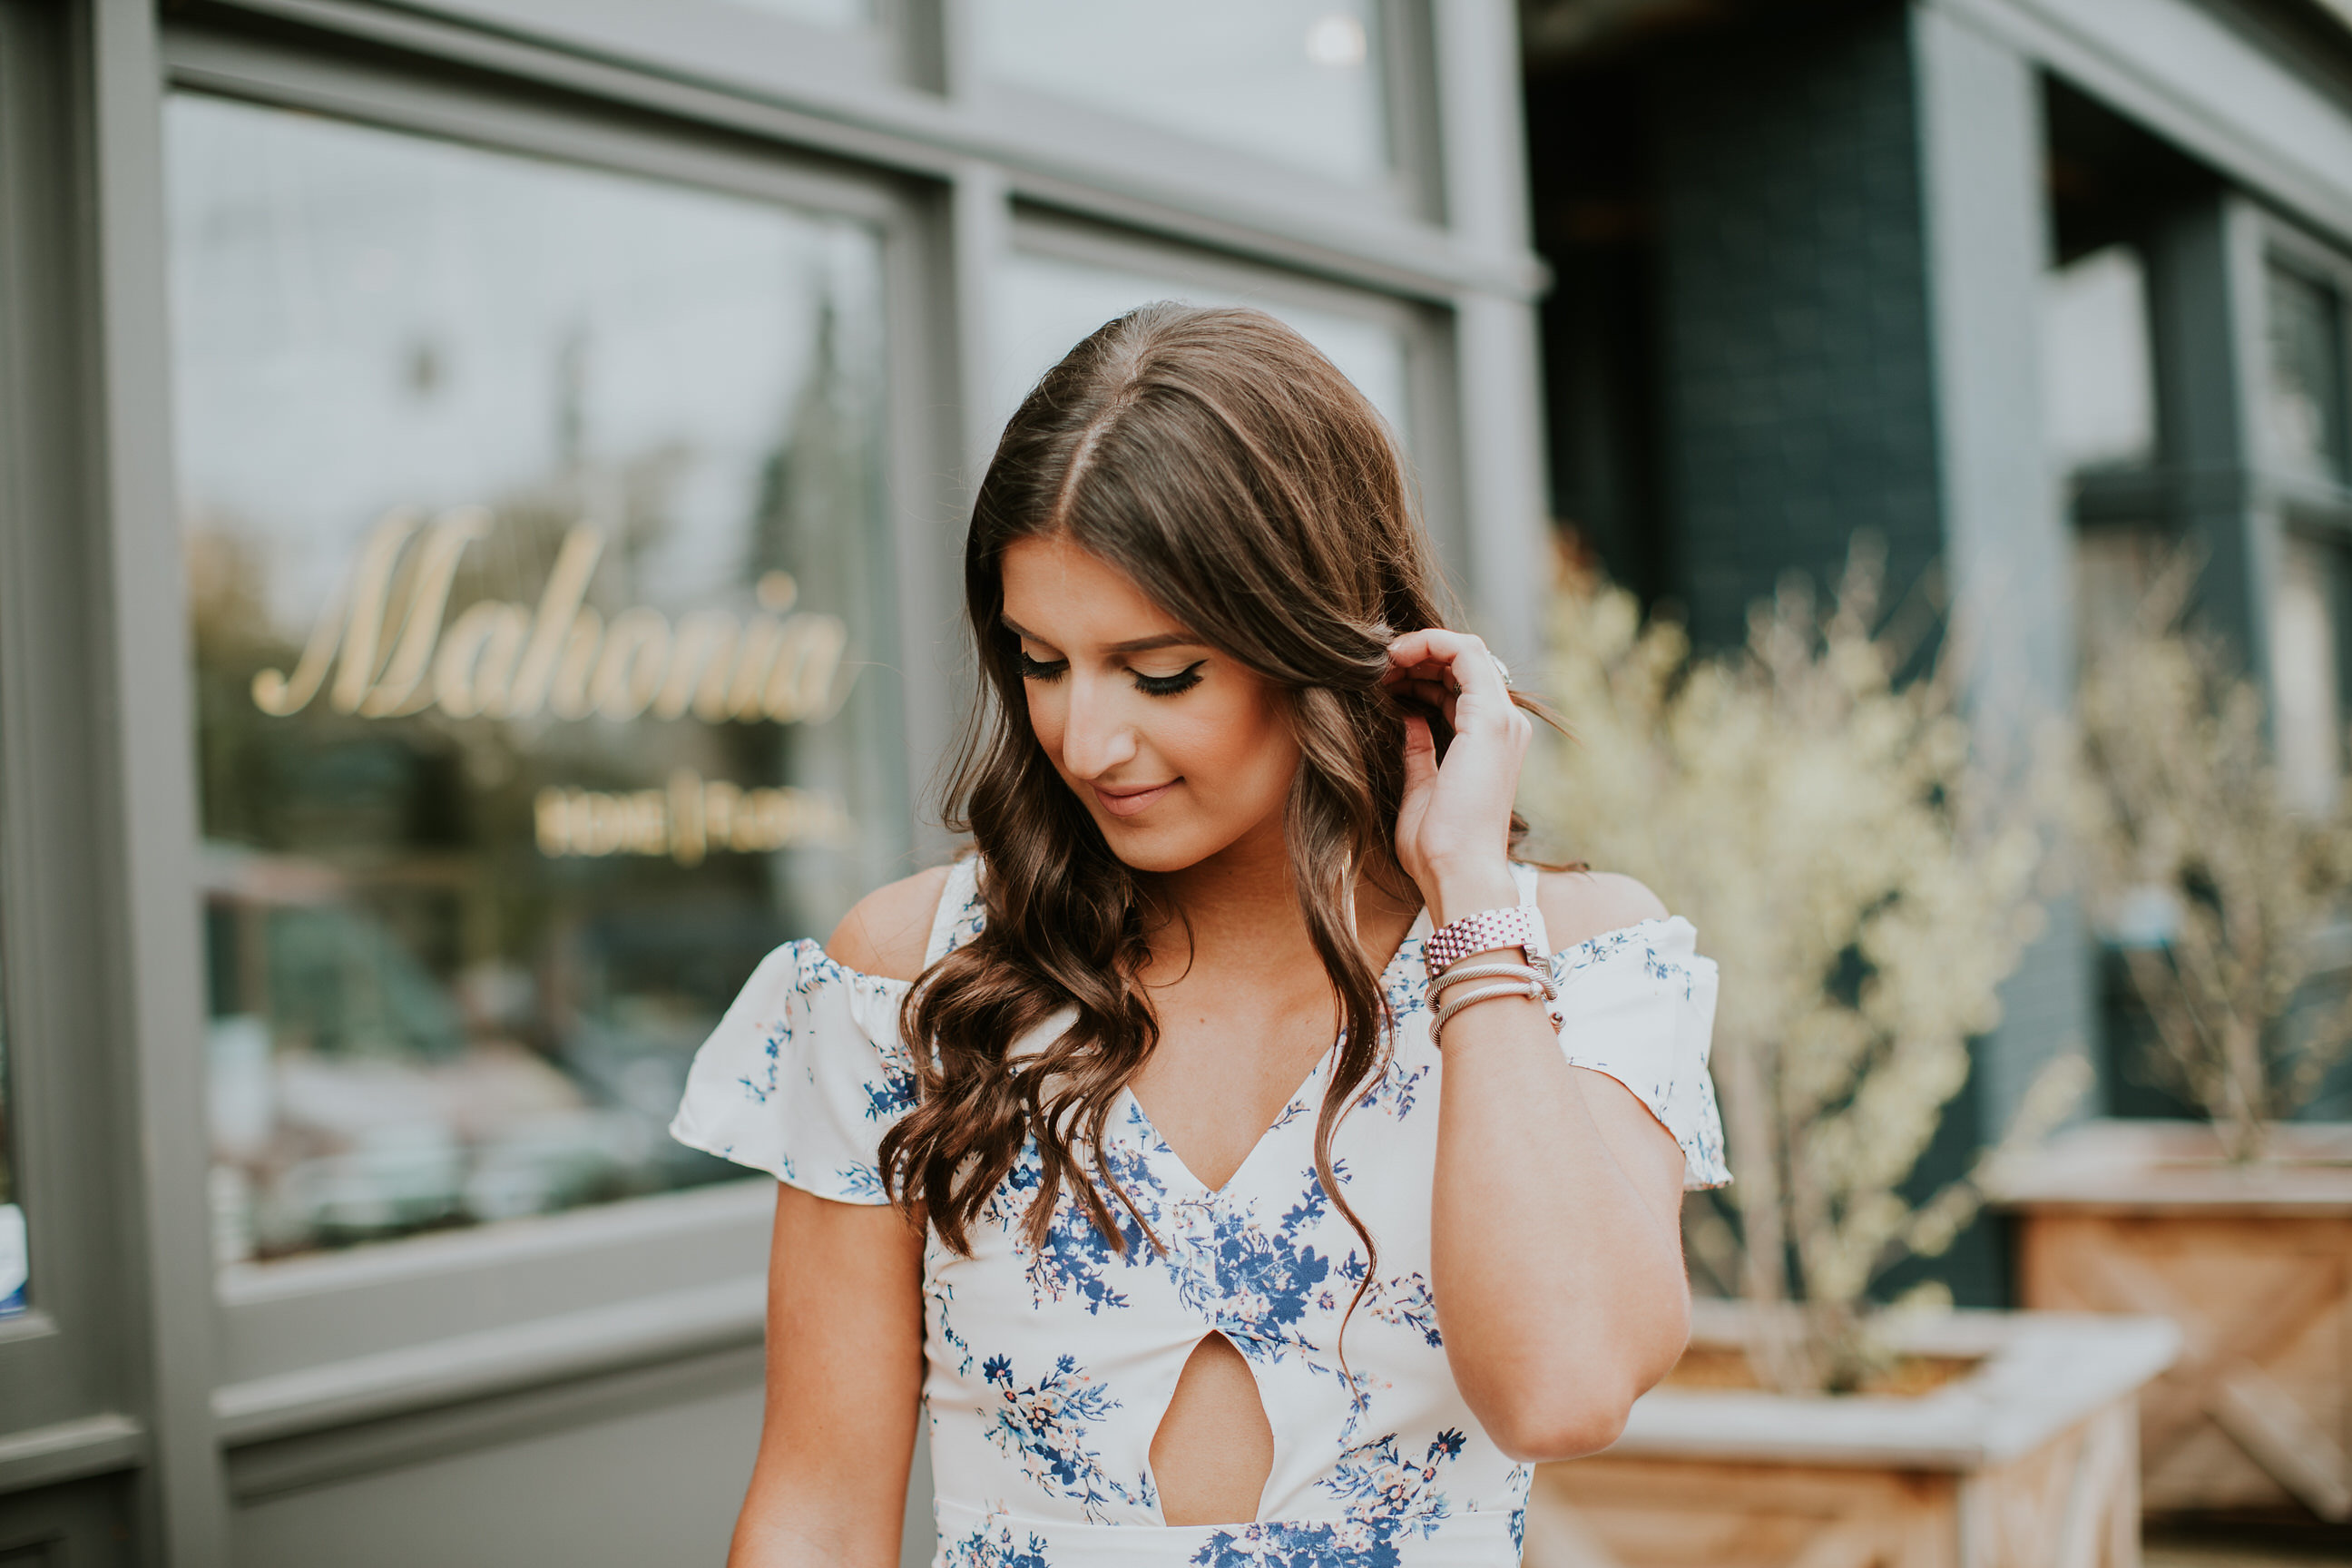 floral cold shoulder dress, spring fashion, spring dress, spring style, spring fashion, kentucky derby dress, cocktail dress, wedding guest dress, gold chain earrings, steve madden carrson sandal // grace wainwright a southern drawl